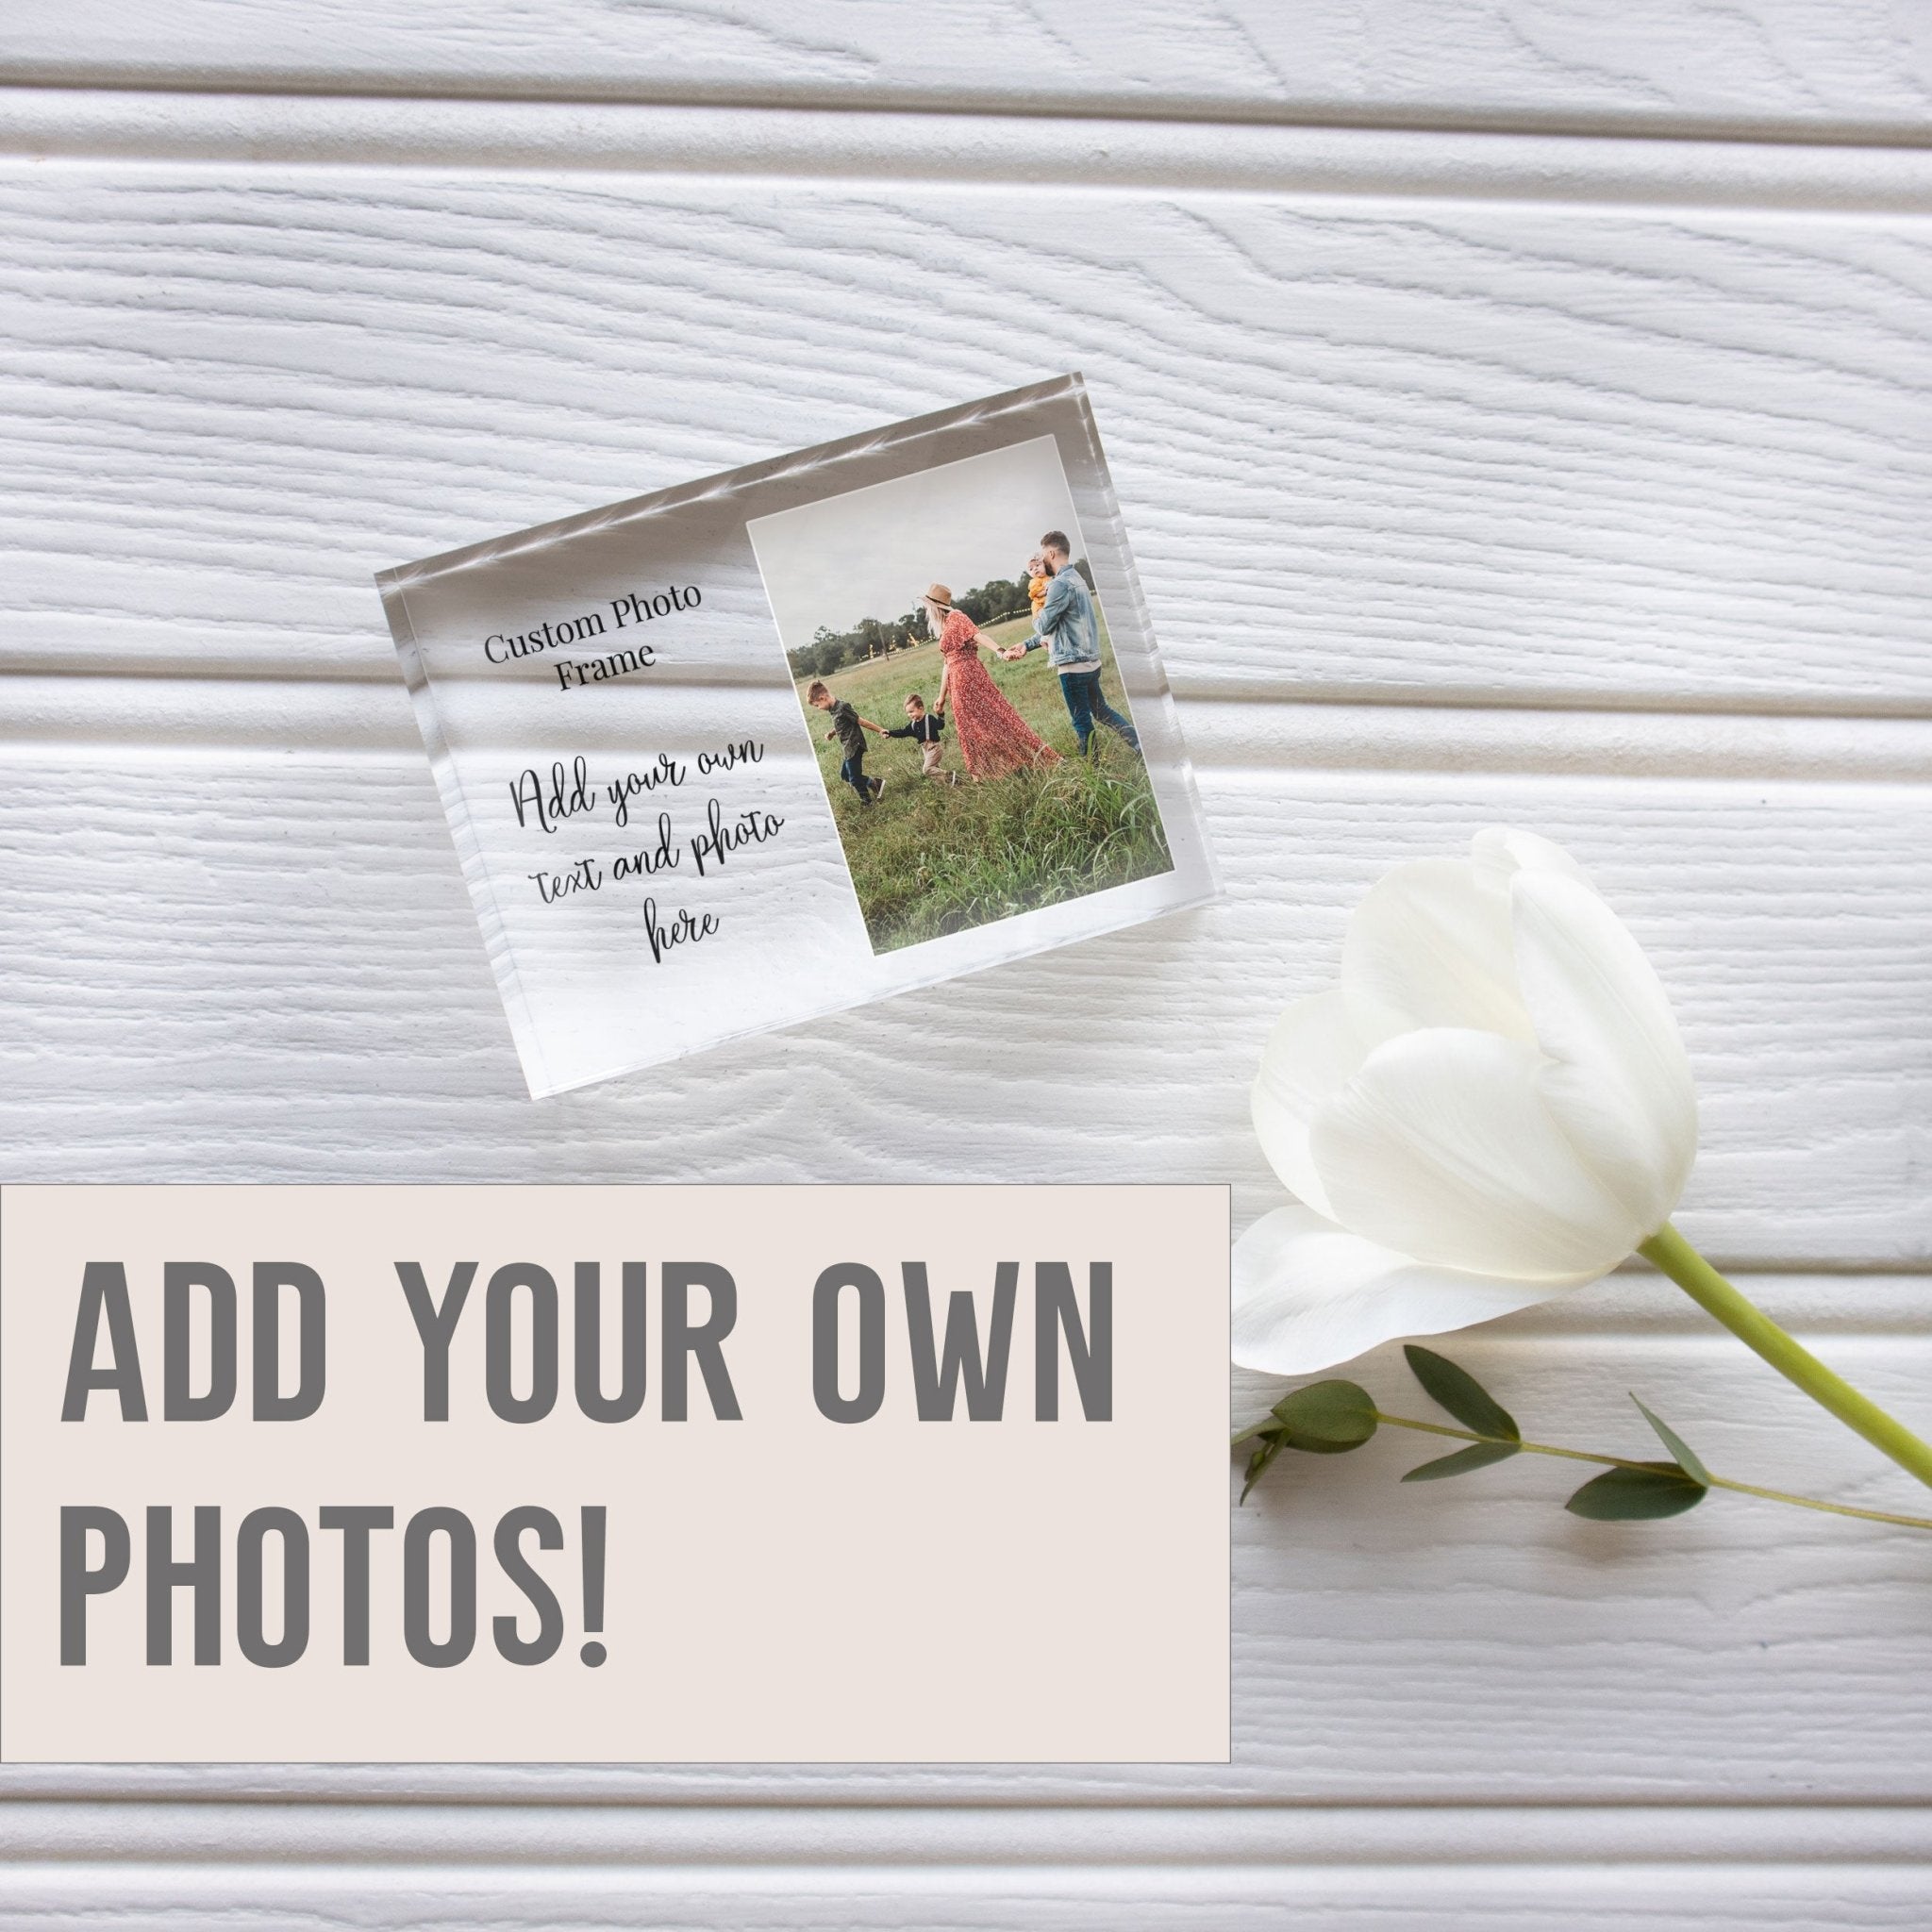 5x7 Customized Family Picture Frame | We Are Family Photo Frame PhotoBlock - Unique Prints